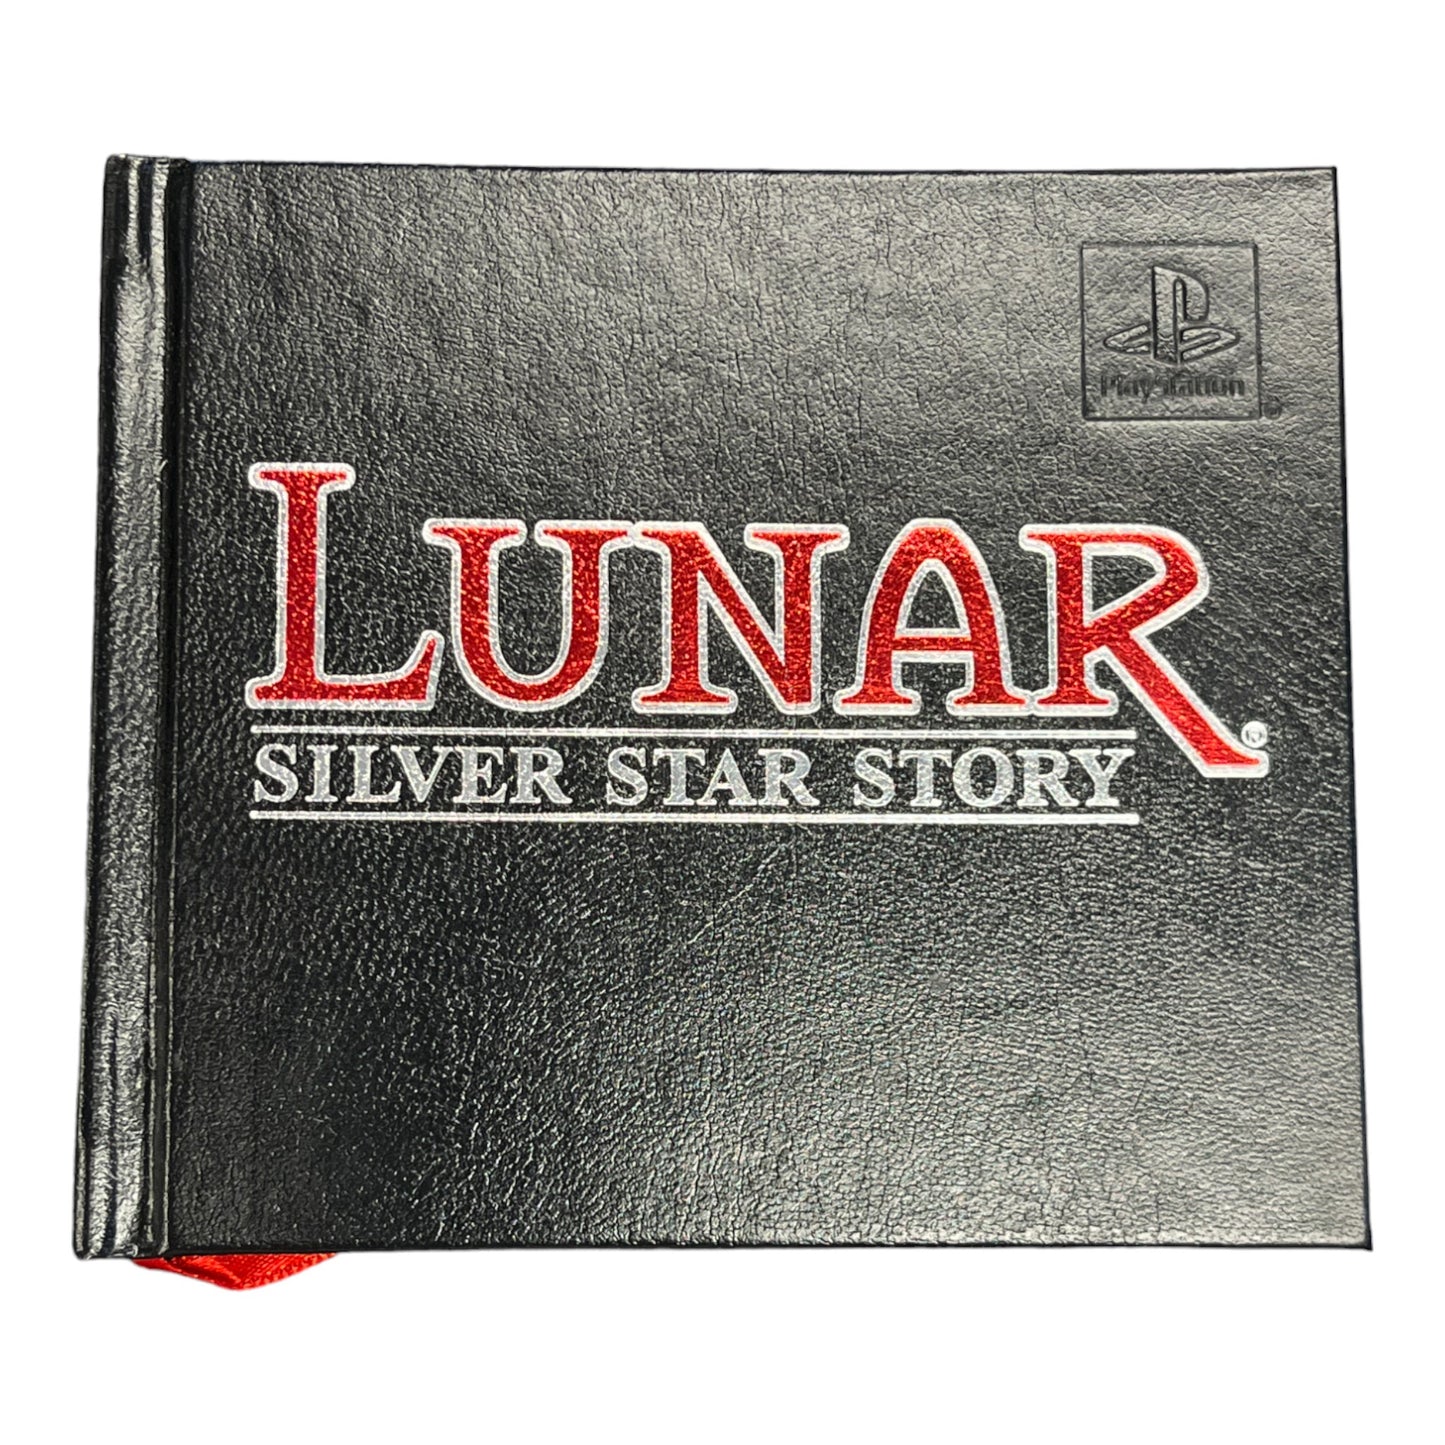 Lunar Silver Star Story Complete [4 Disc] Collector's Edition (PS1)